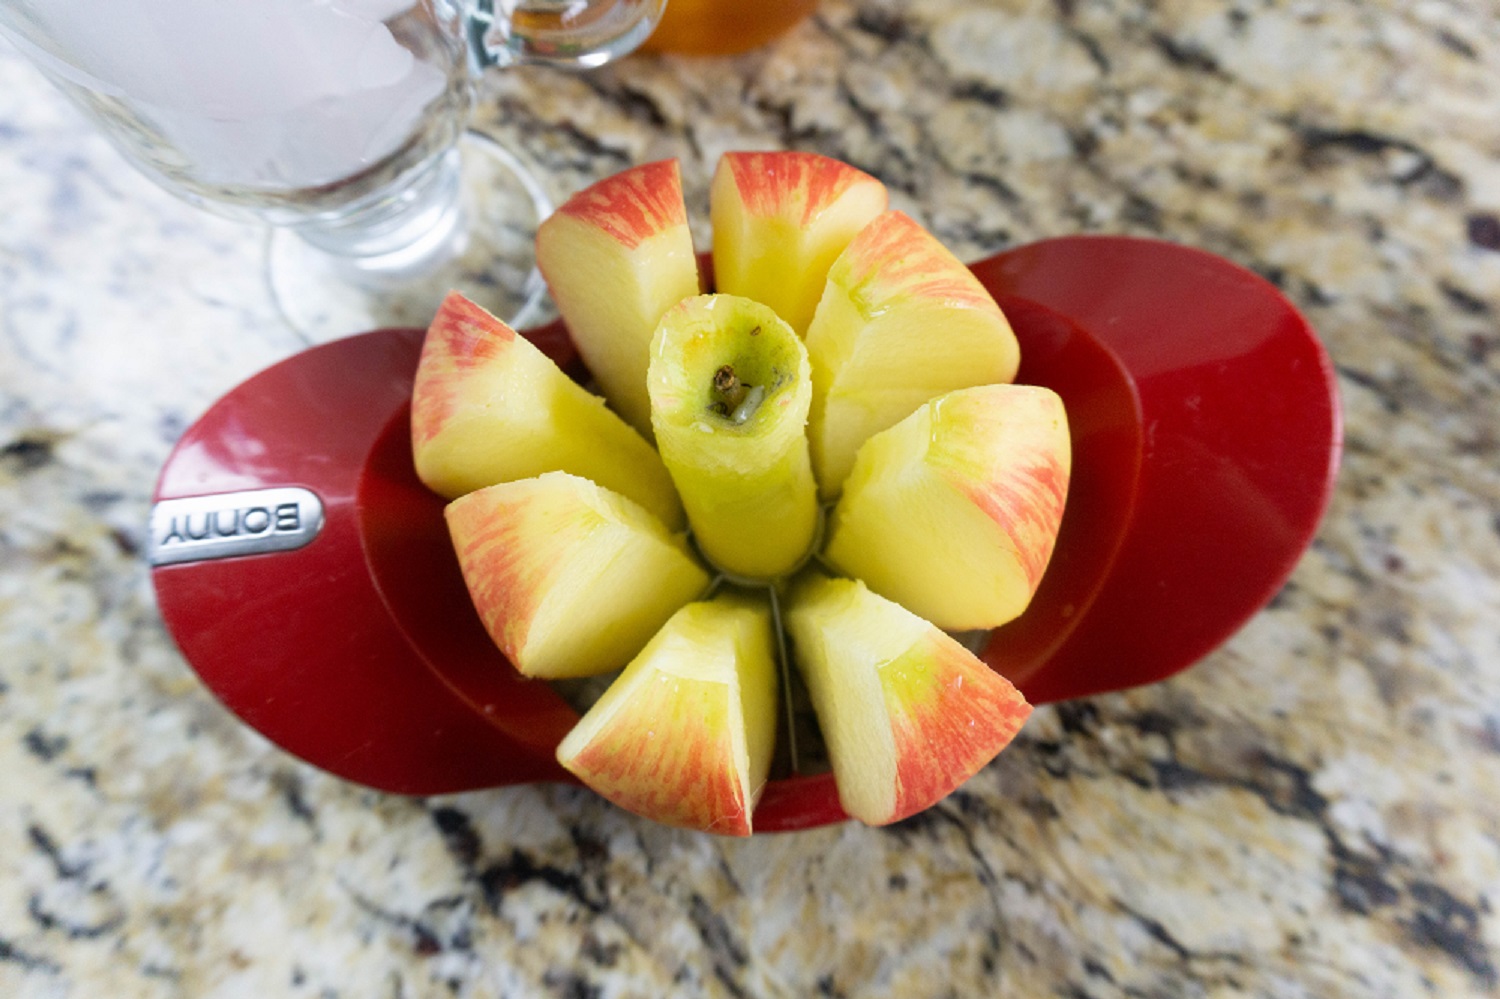 A cored apple in an apple slicer.